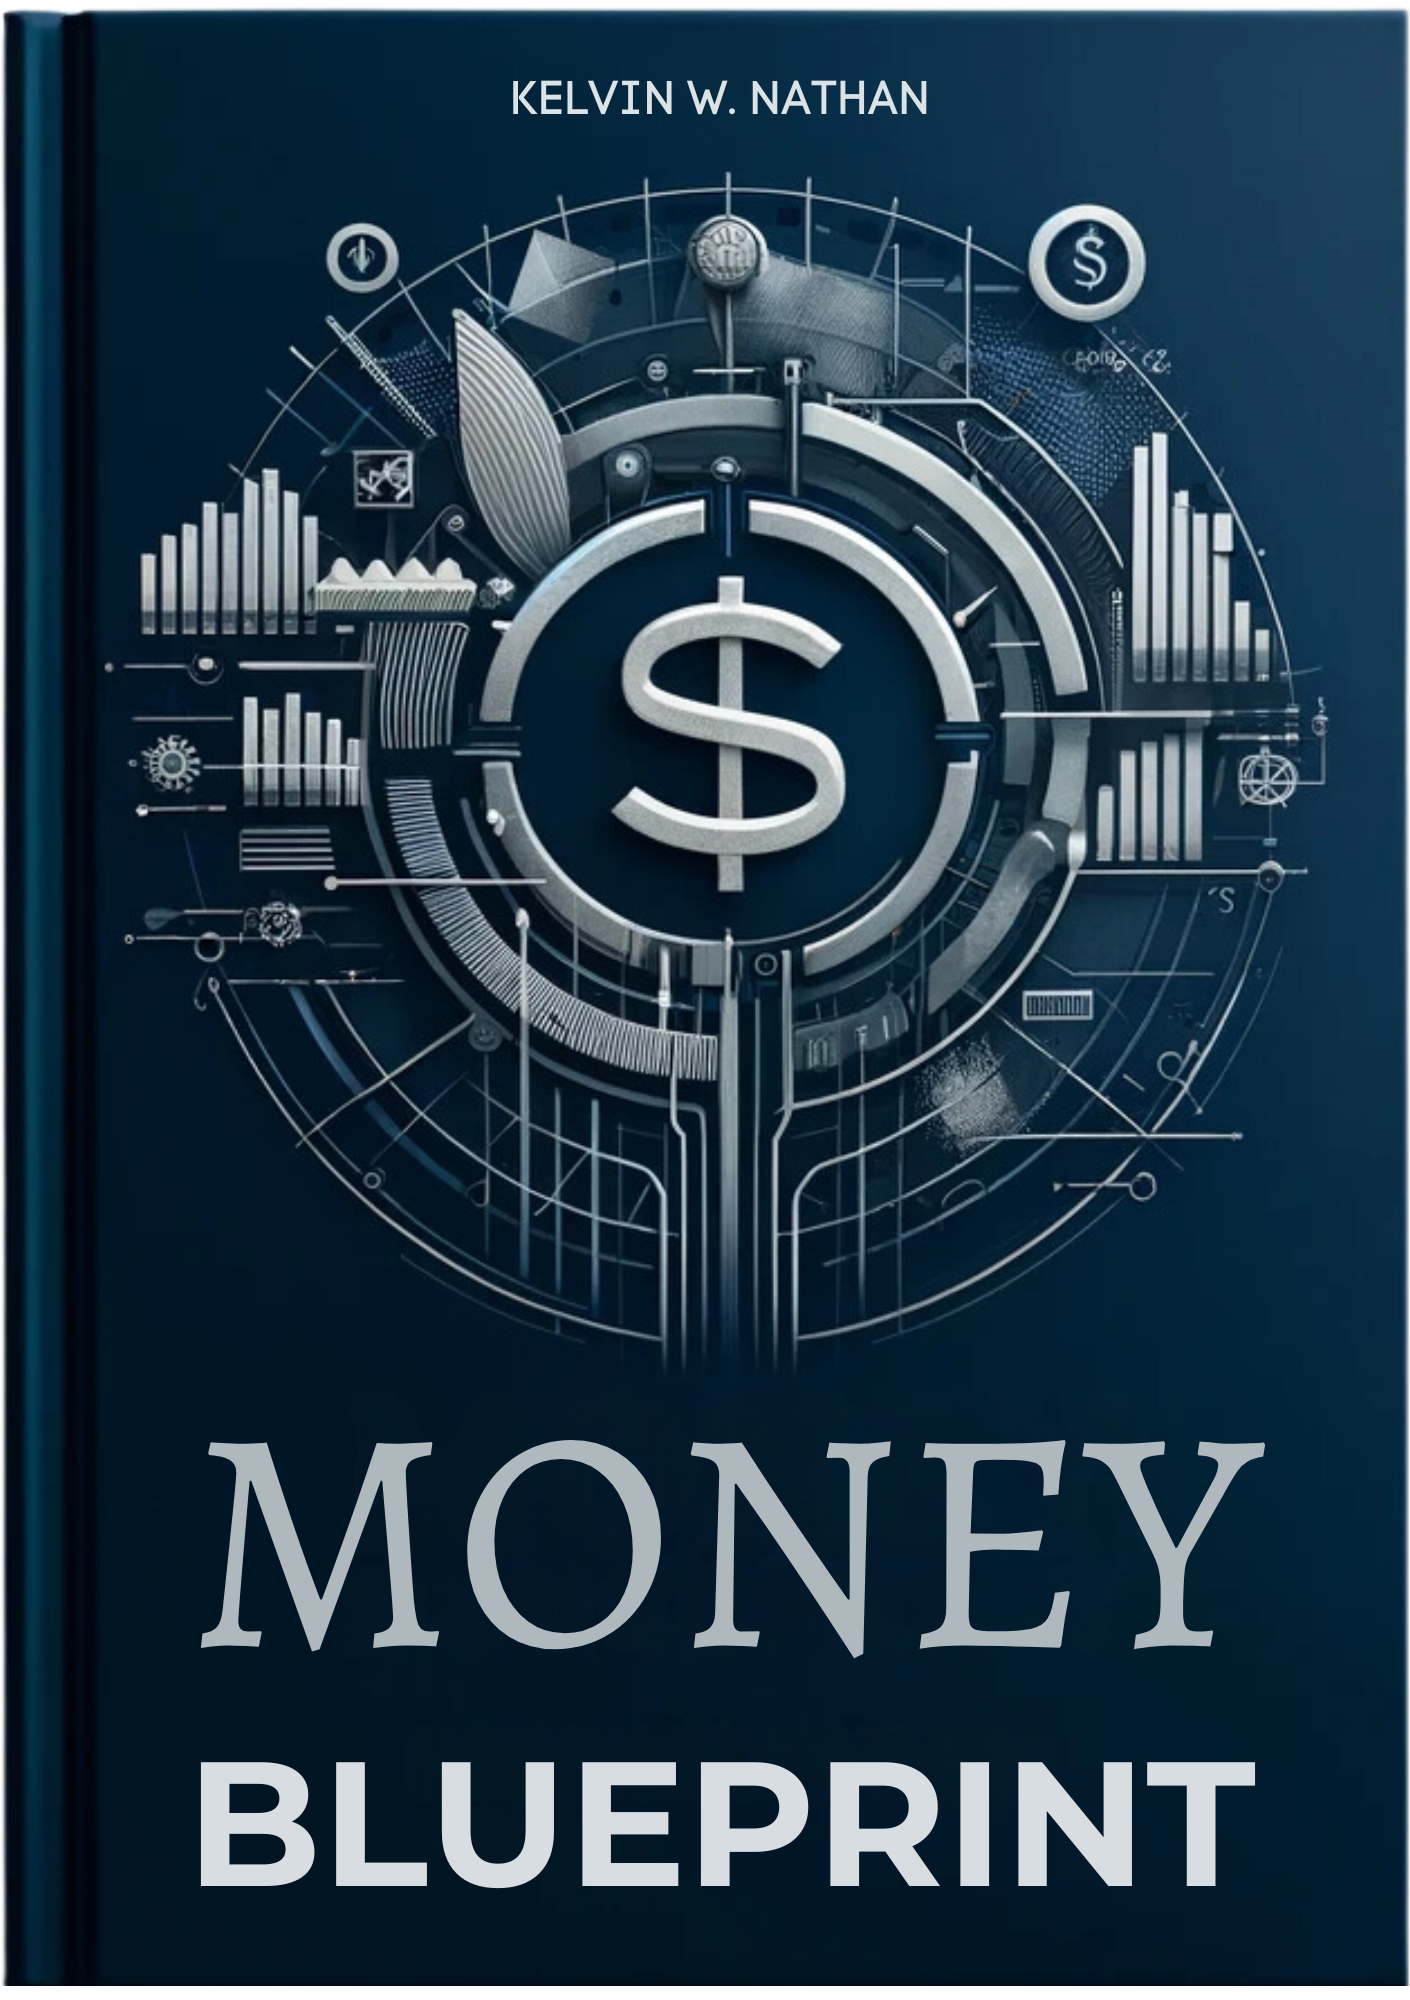 Money Blueprint: The "Wealthy People" Don't Want You to Find This Out (eBook)